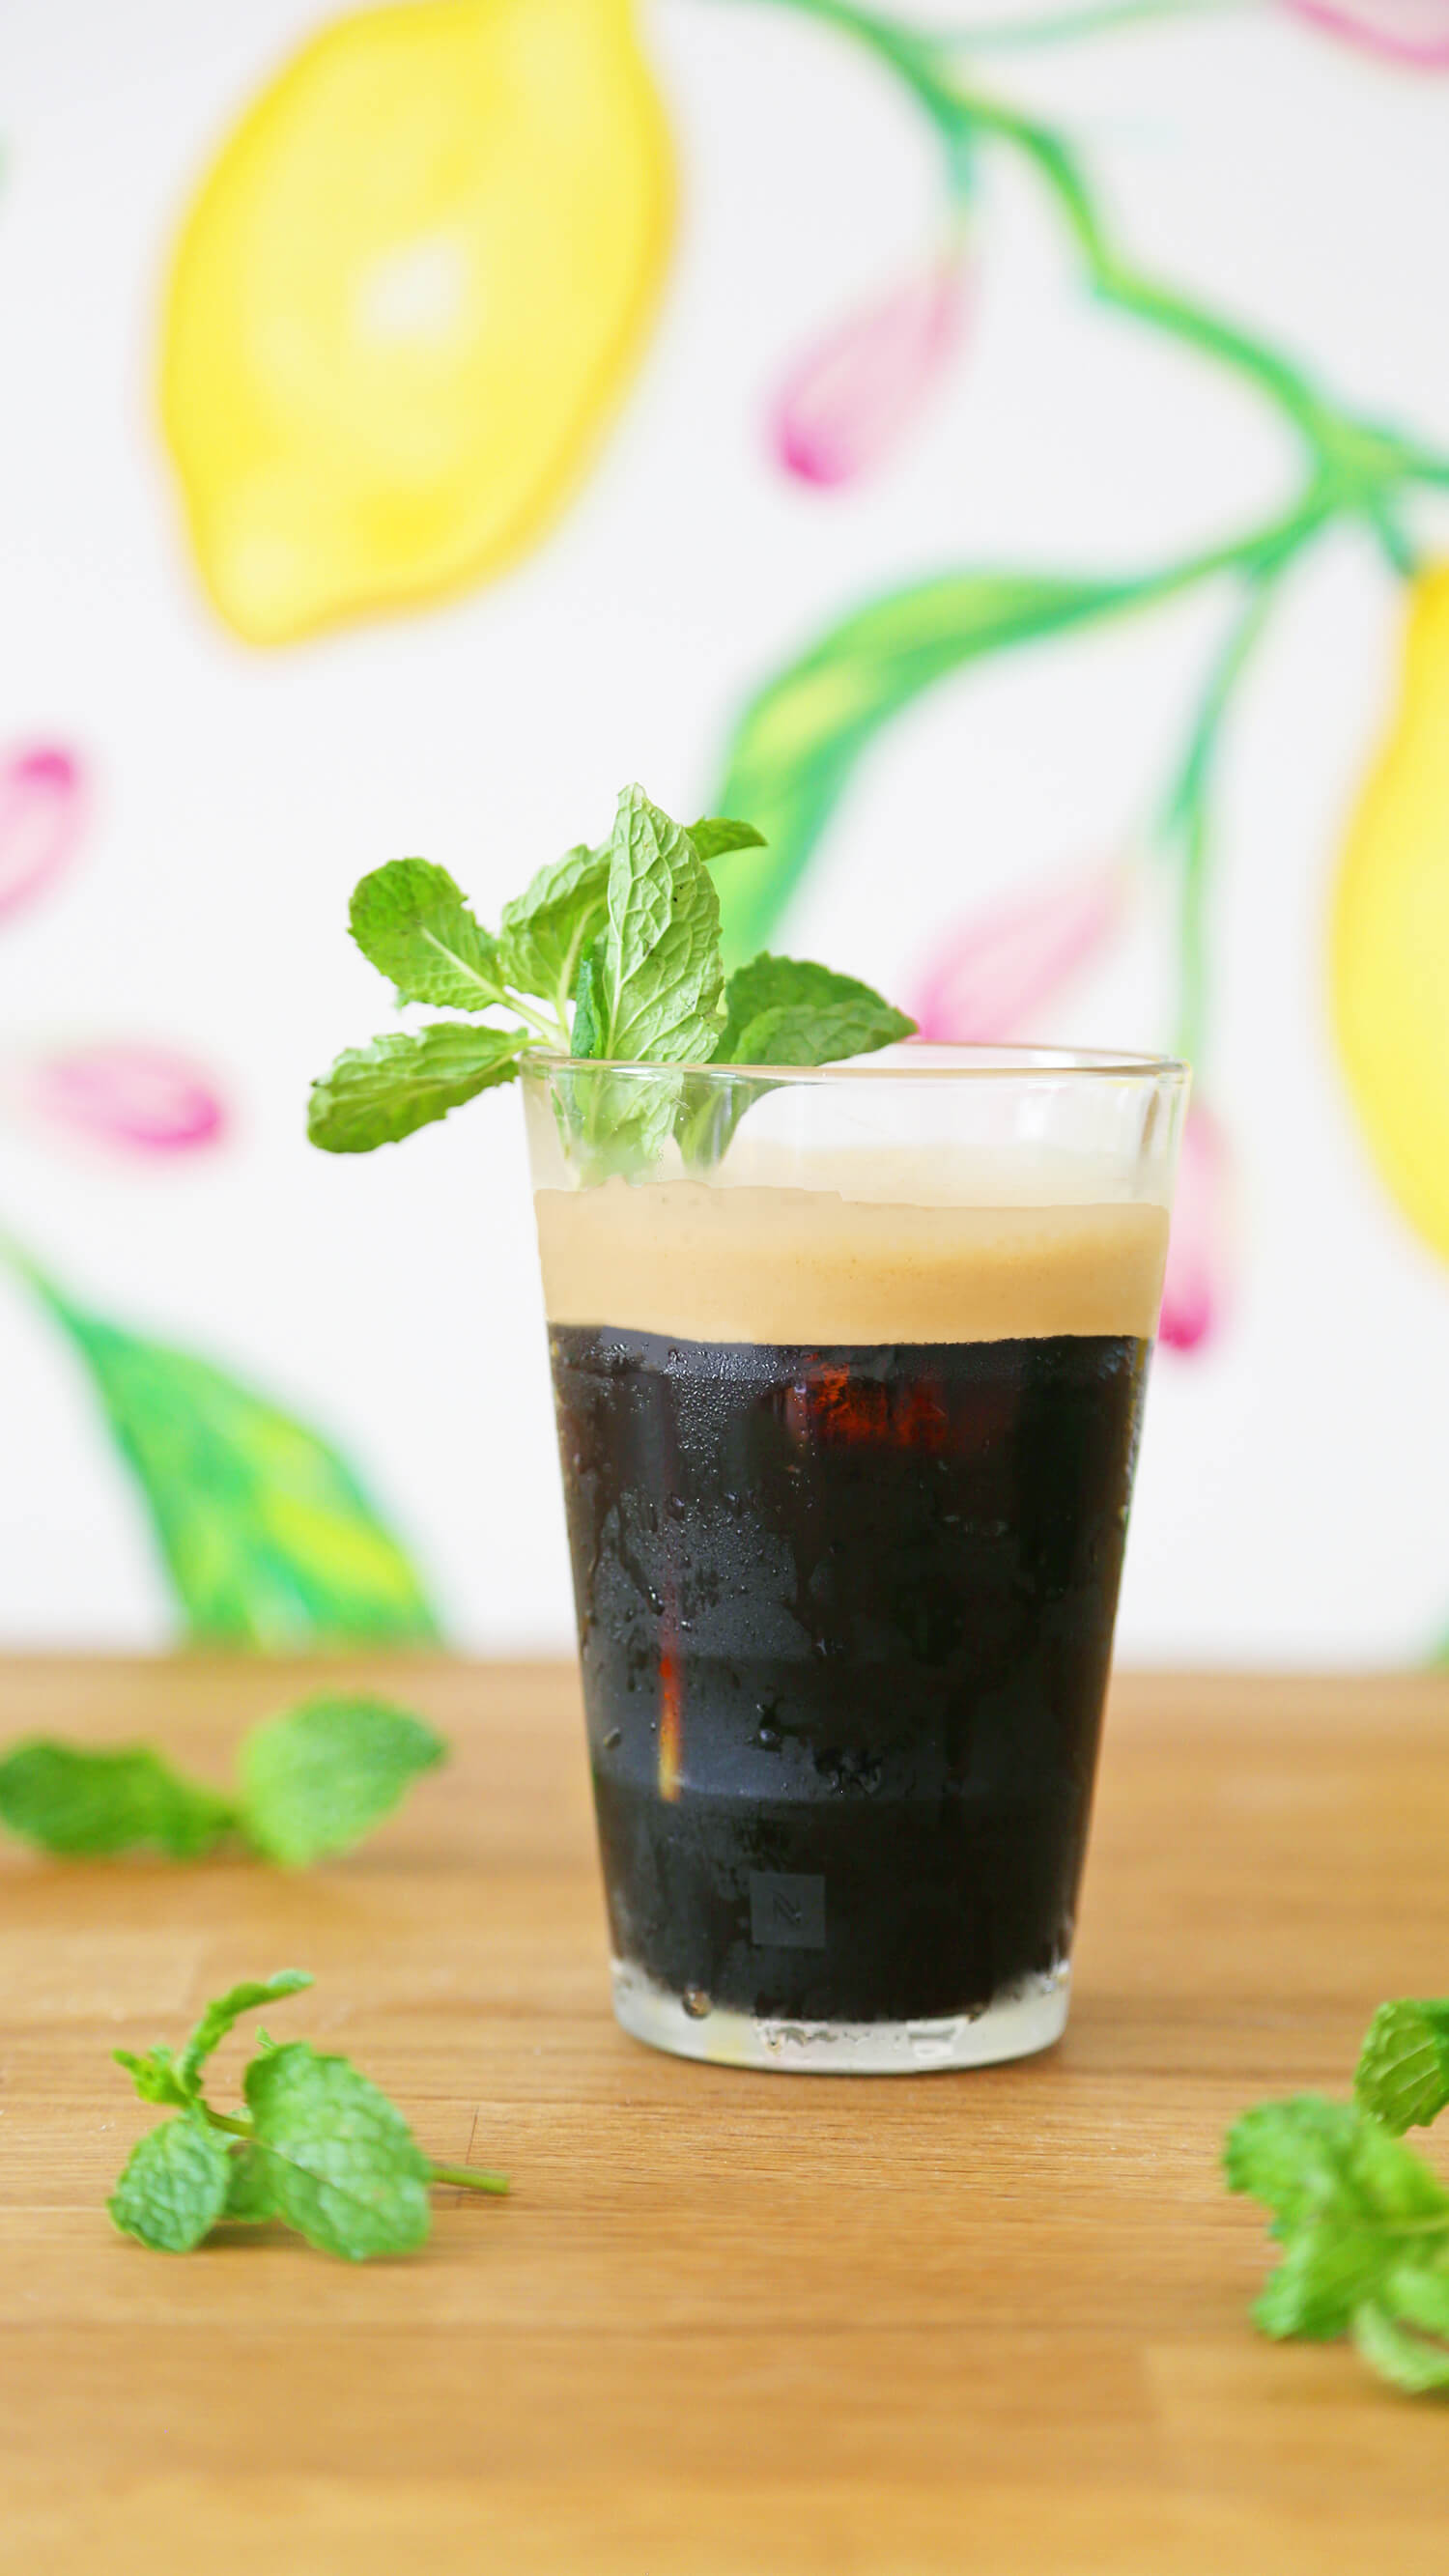 Chill Out with these Iced Coffee Recipes for Summer